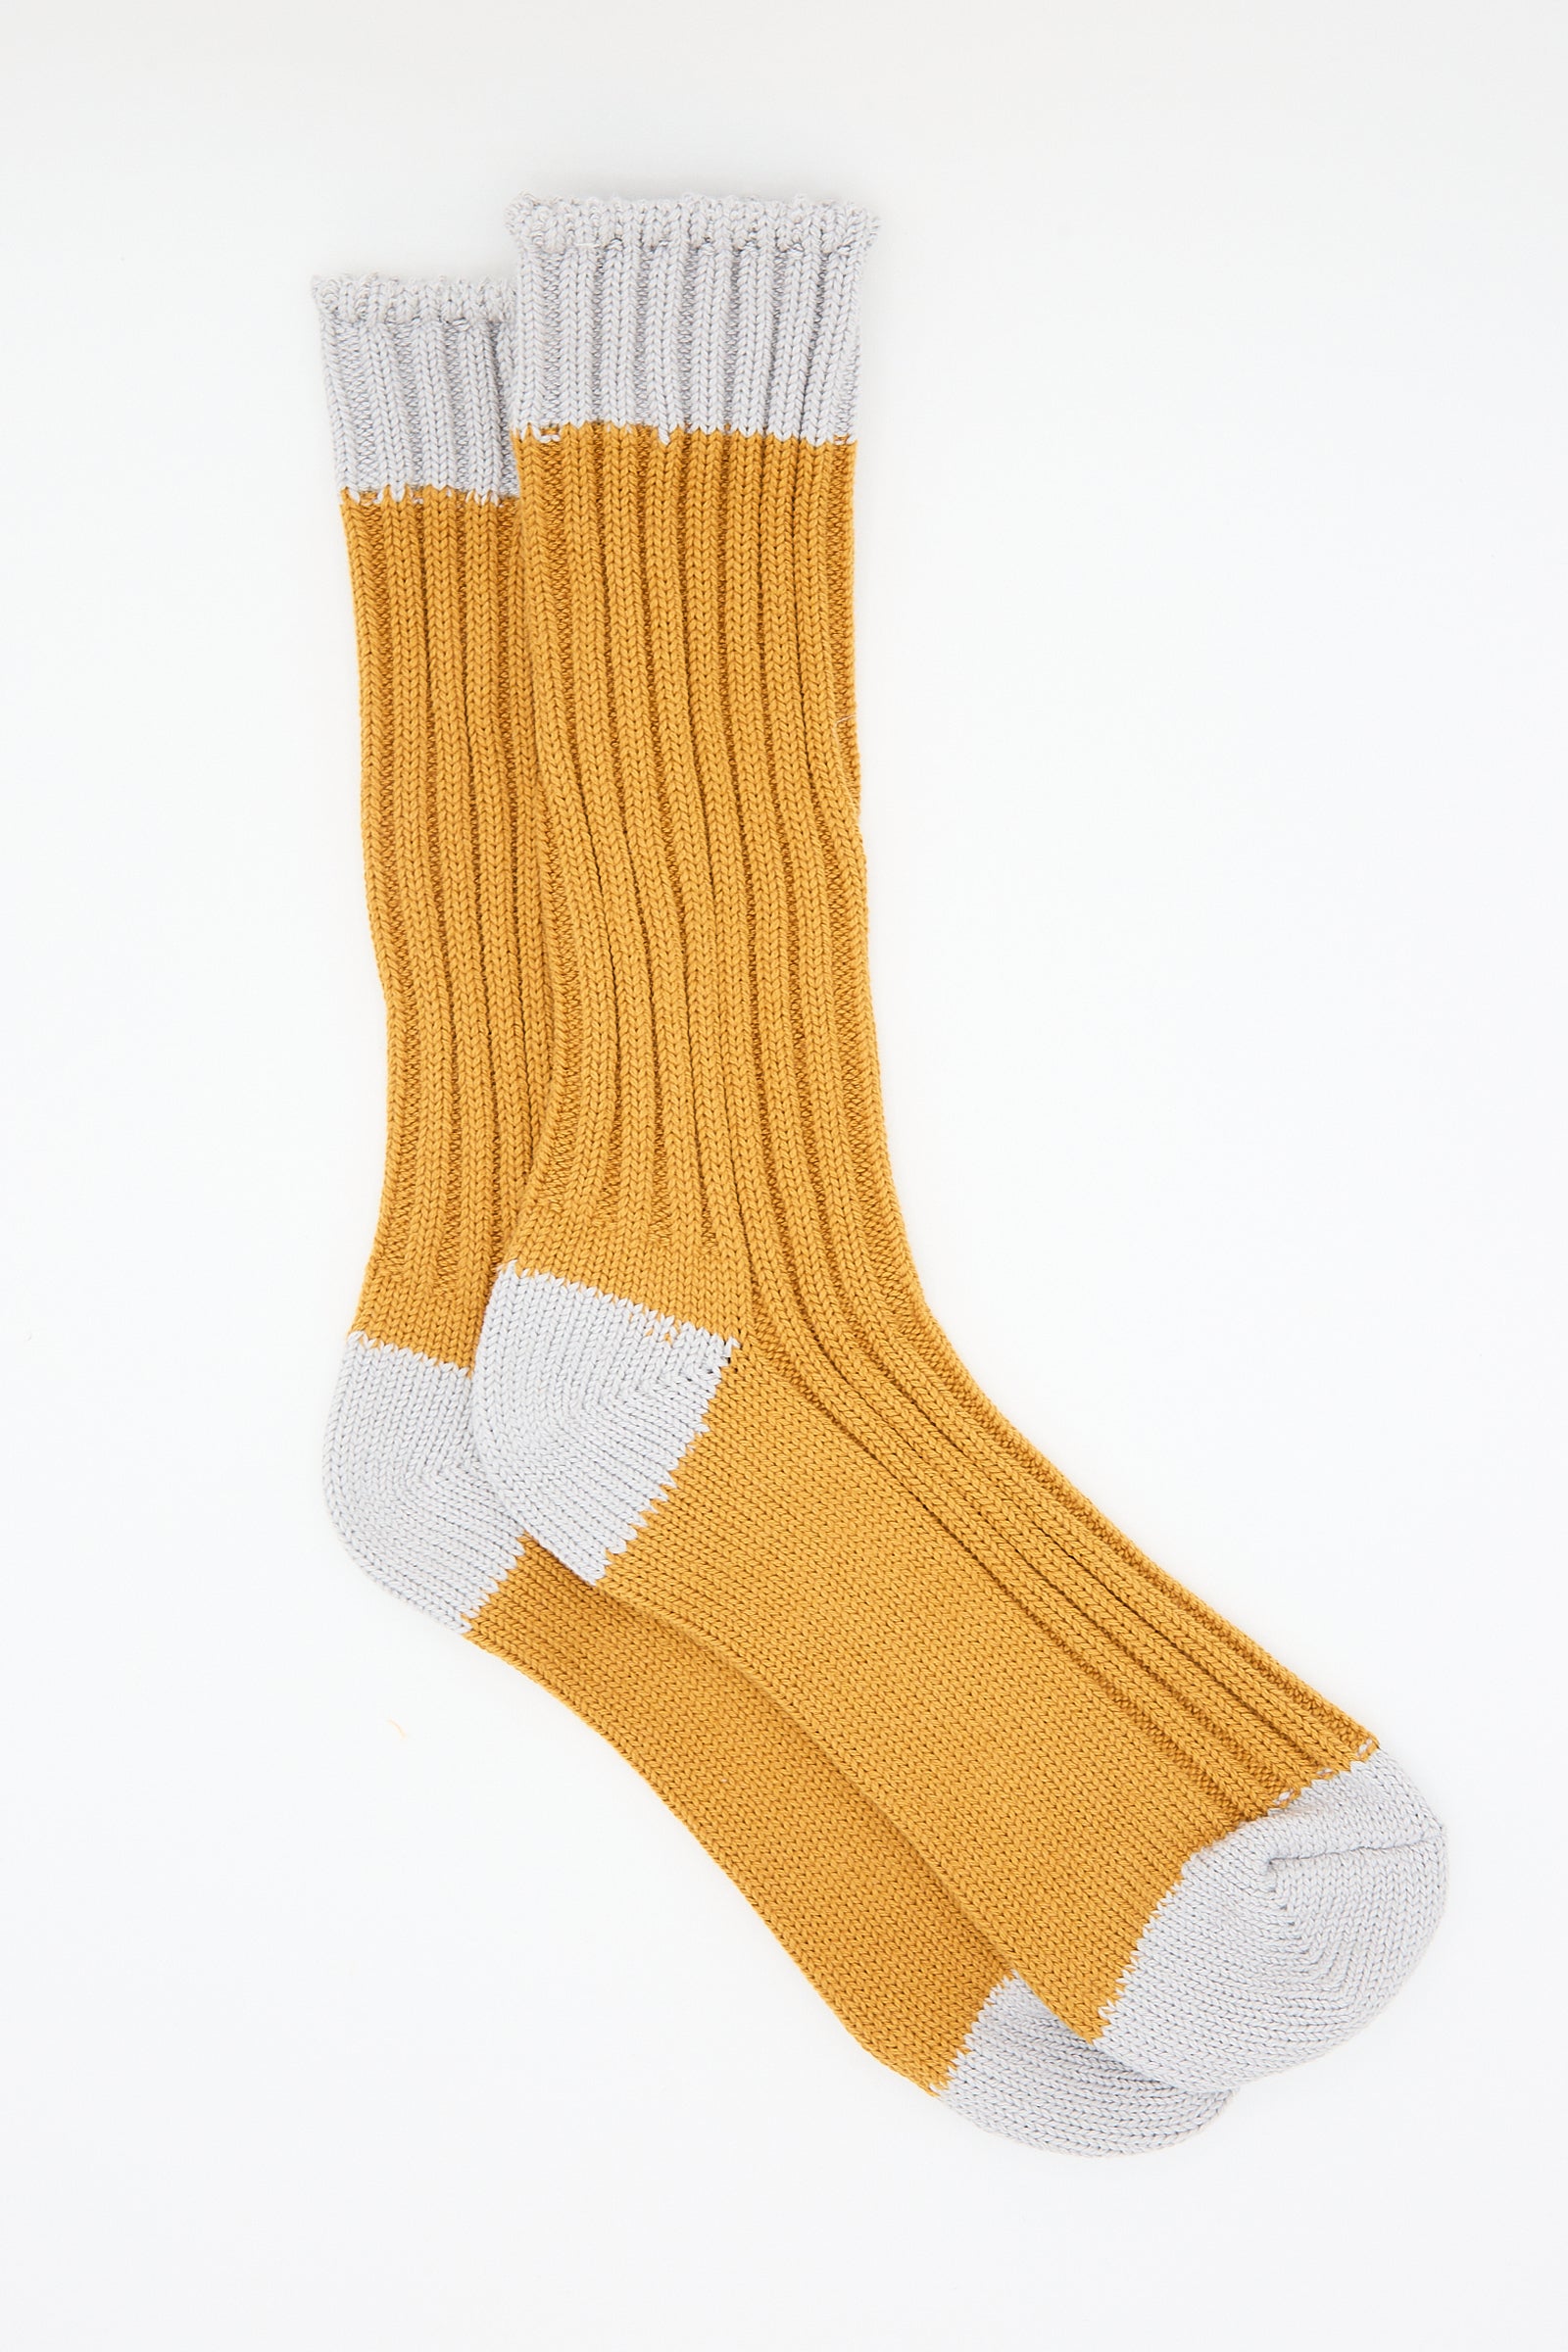 A pair of Ichi Antiquités Organic Cotton Rib Socks in Mustard, isolated on a white background.